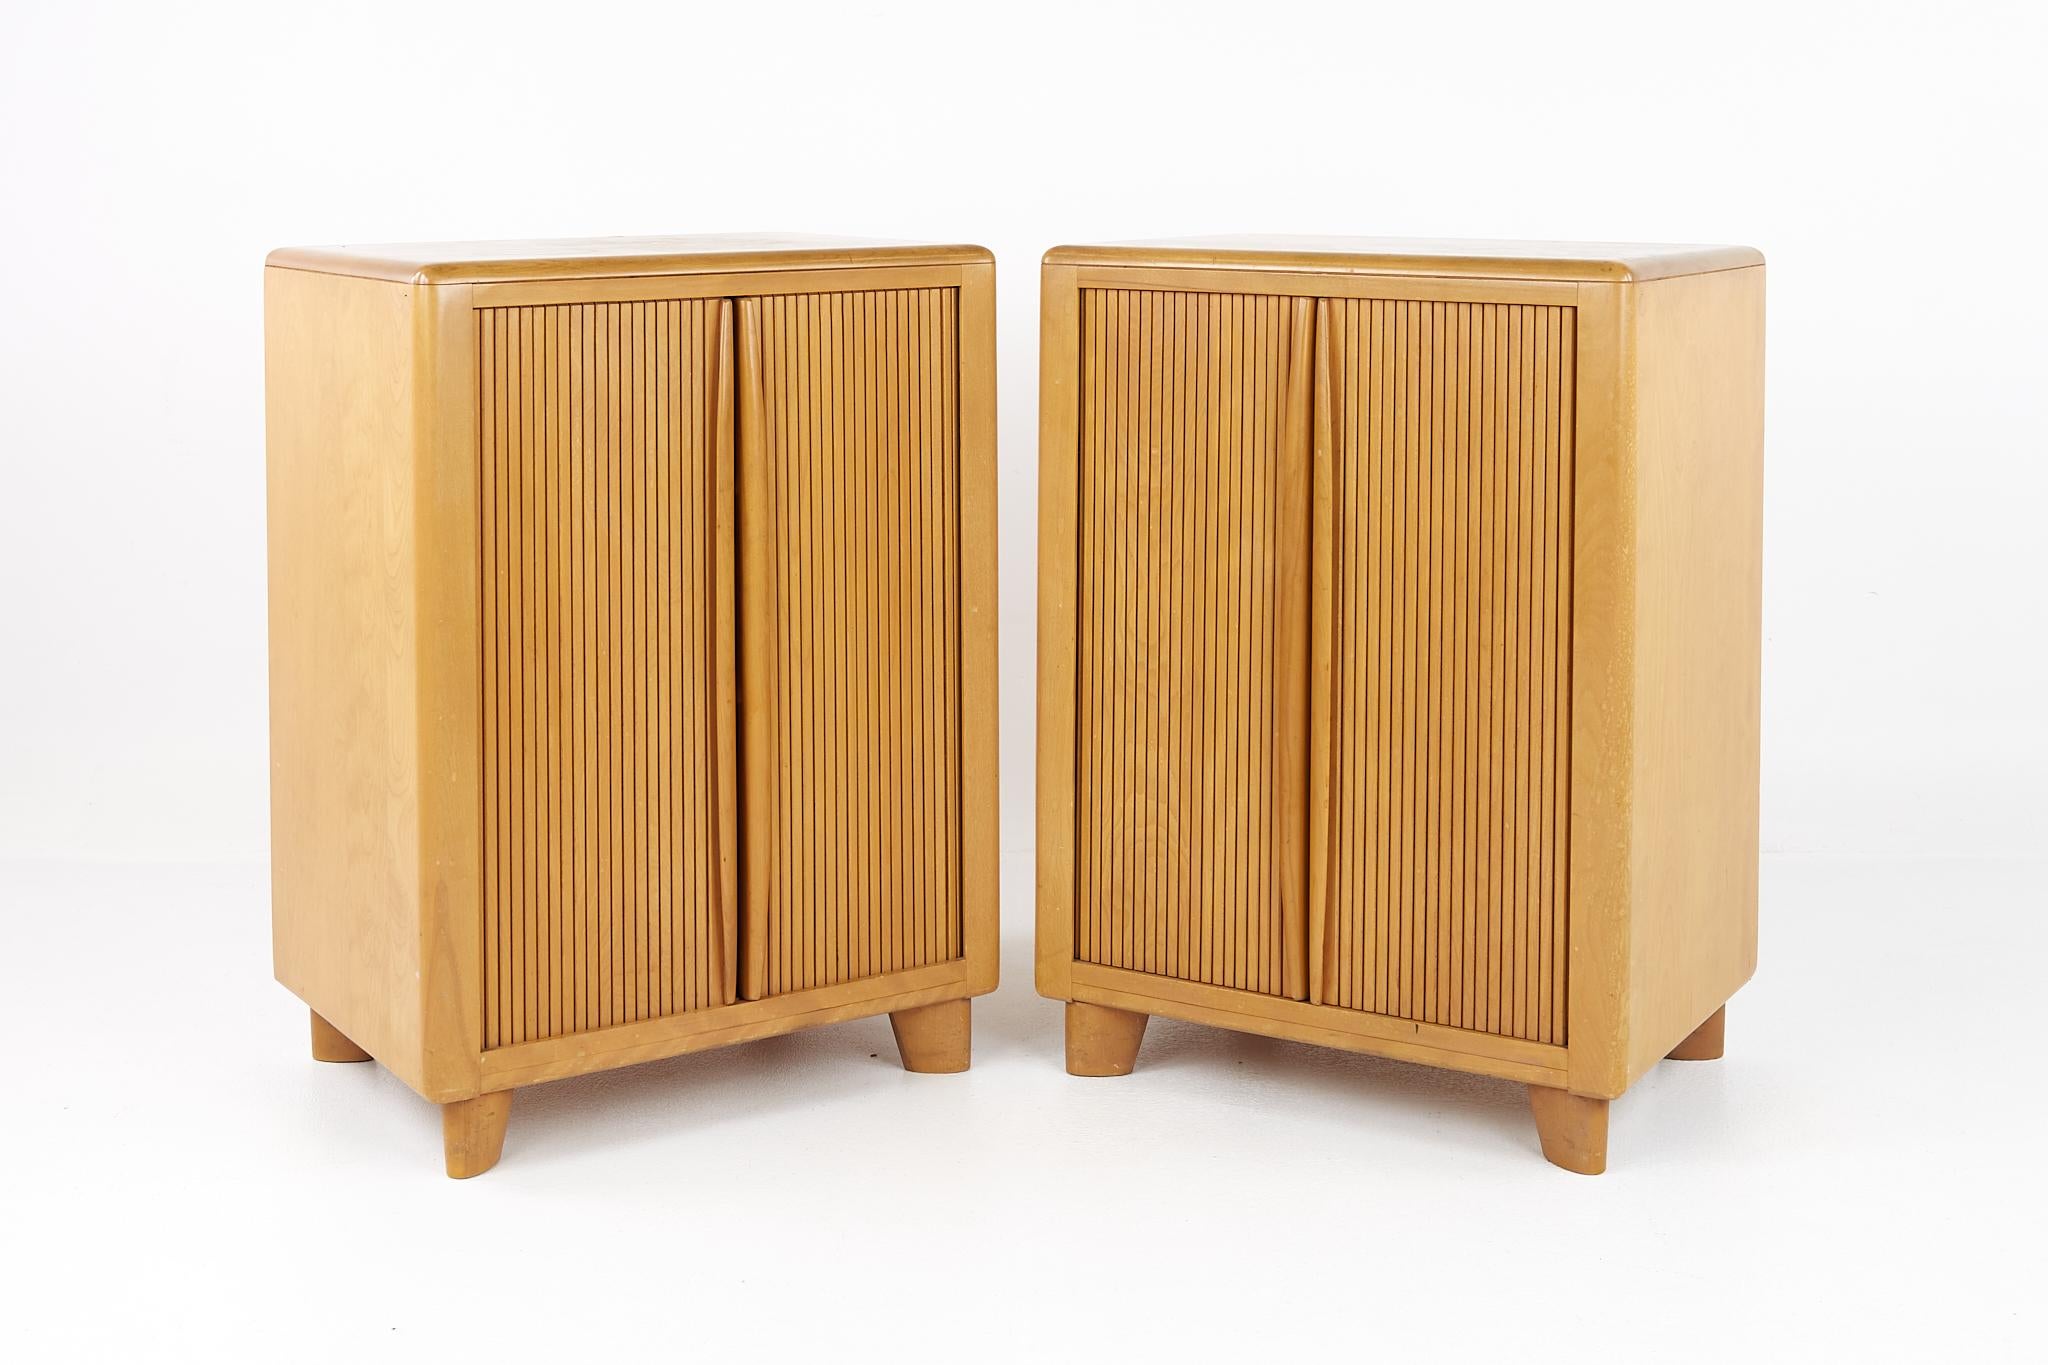 Heywood Wakefield mid century Tambour door bookcase cabinet - pair

Each cabinet measures: 24 wide x 17 deep x 32.5 inches high

All pieces of furniture can be had in what we call restored vintage condition. That means the piece is restored upon